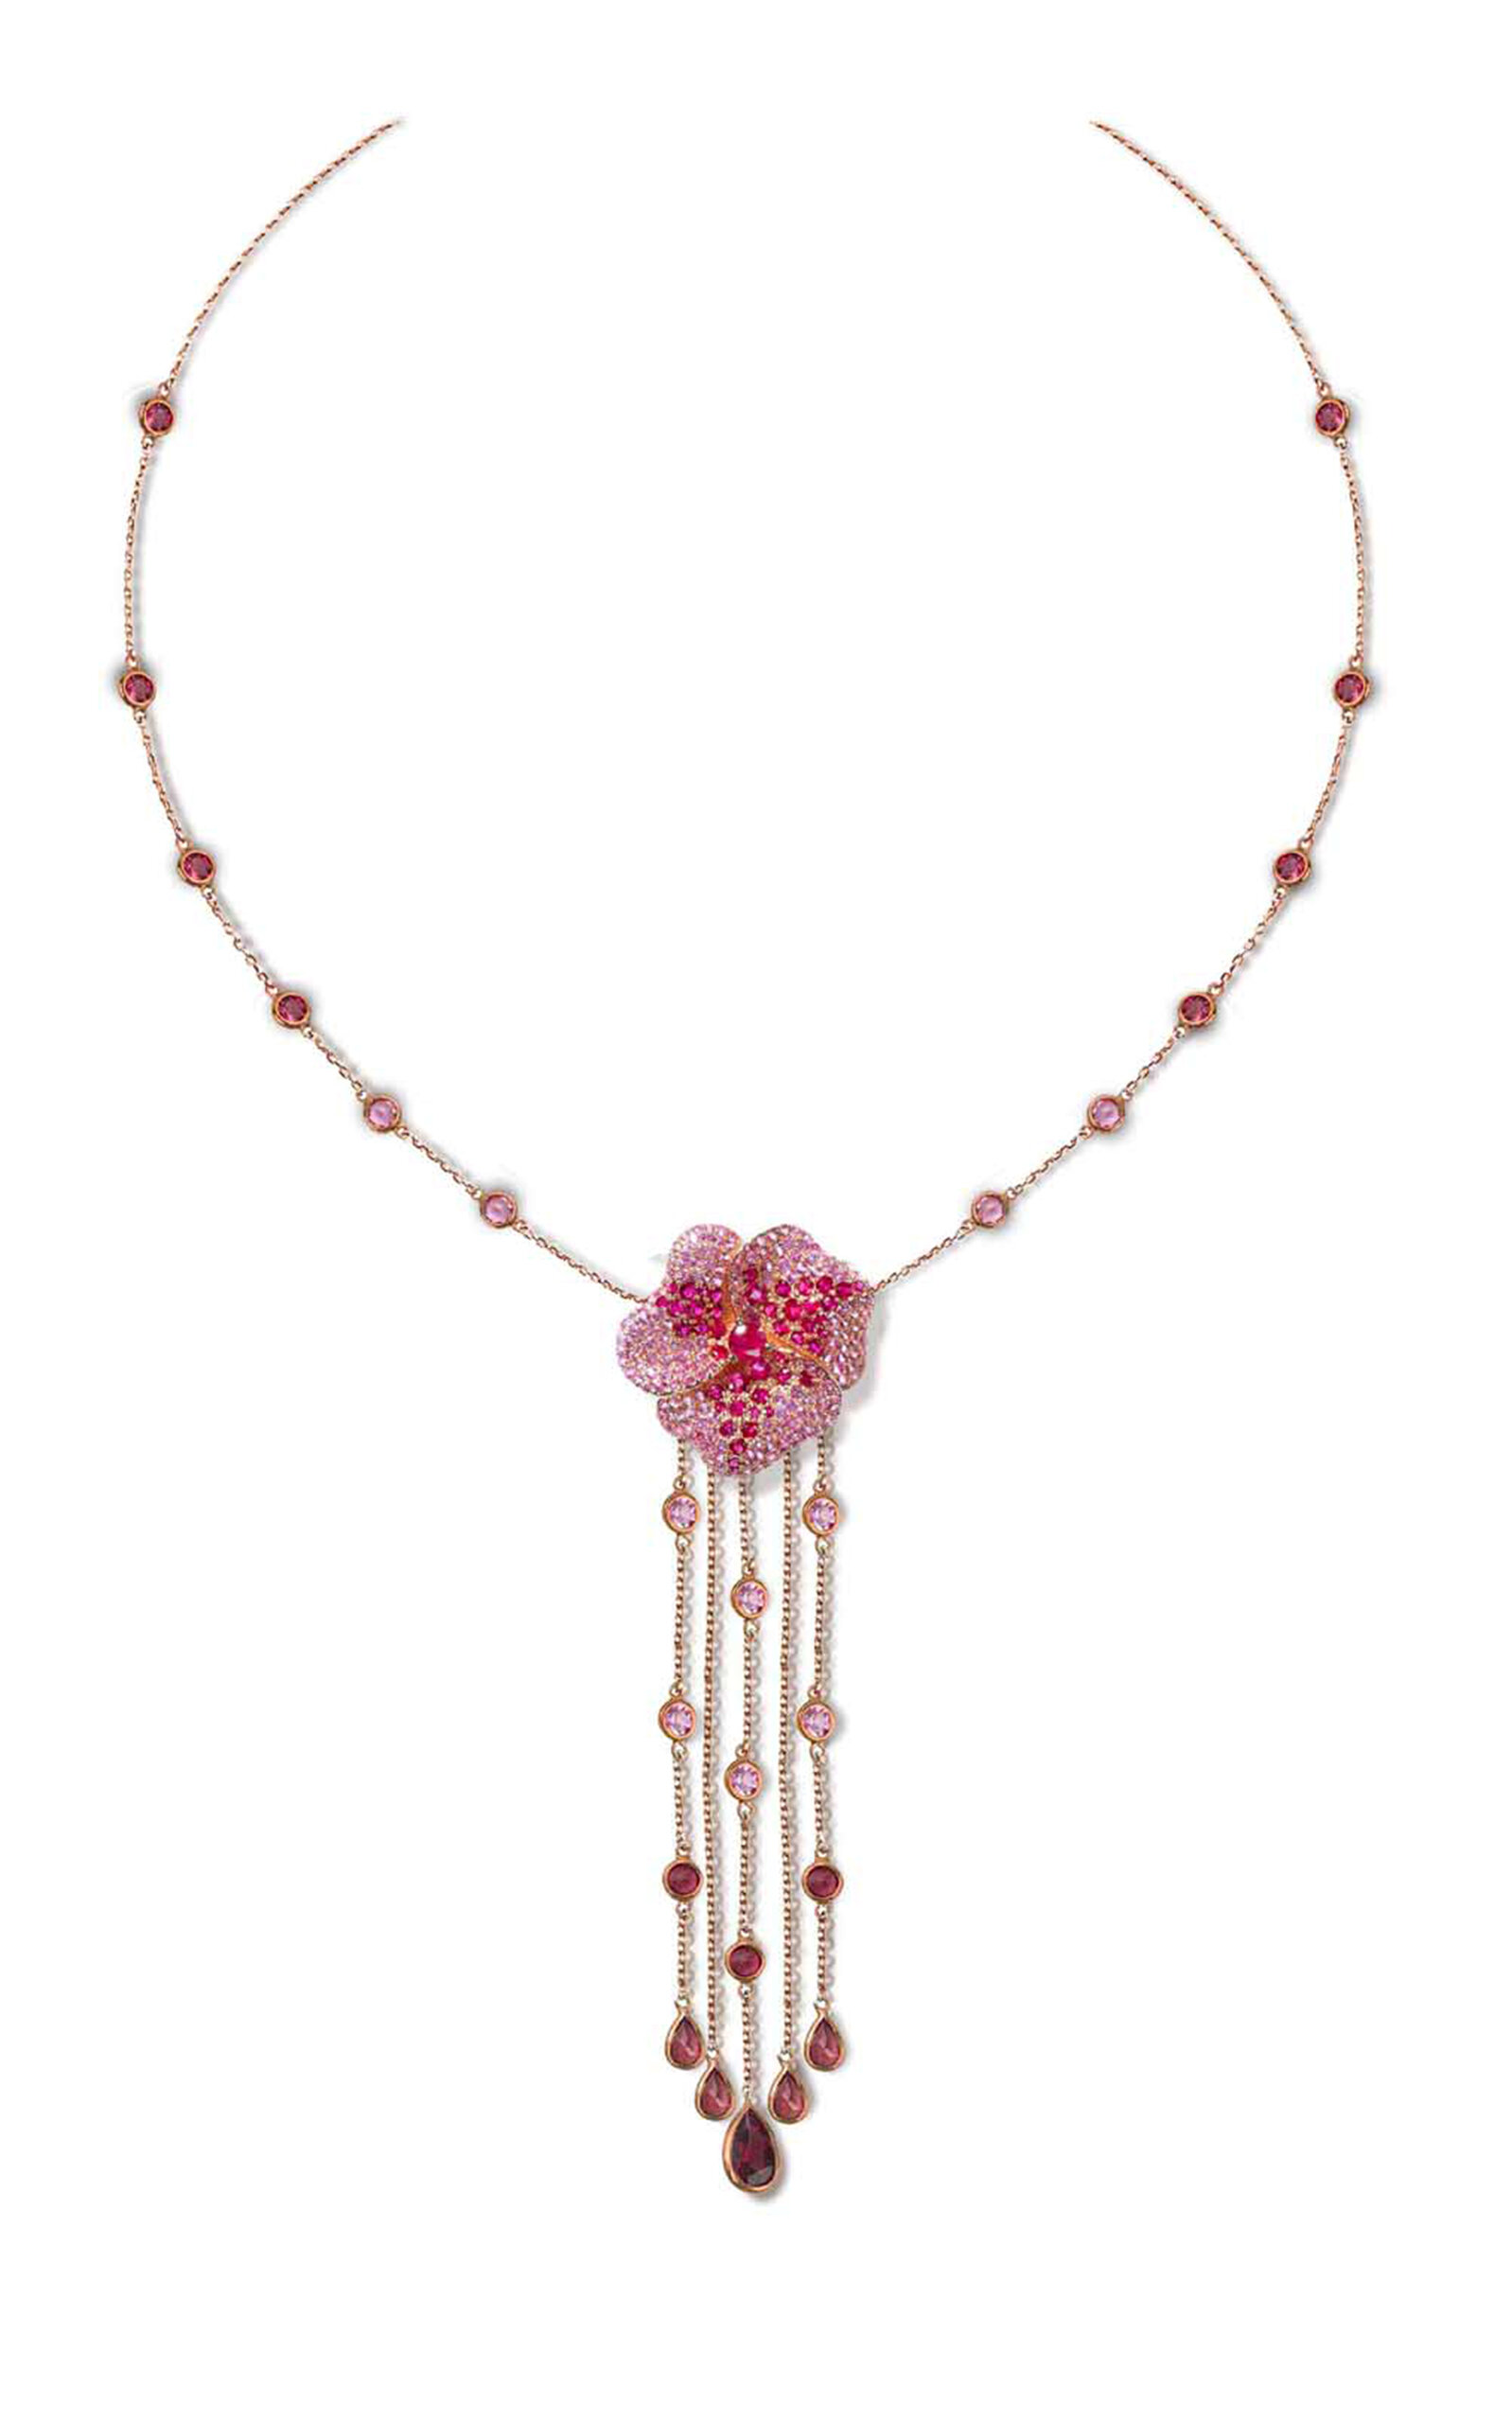 One of a Kind Bloom 18K Rose Gold; Sapphire And Rhodorite Necklace